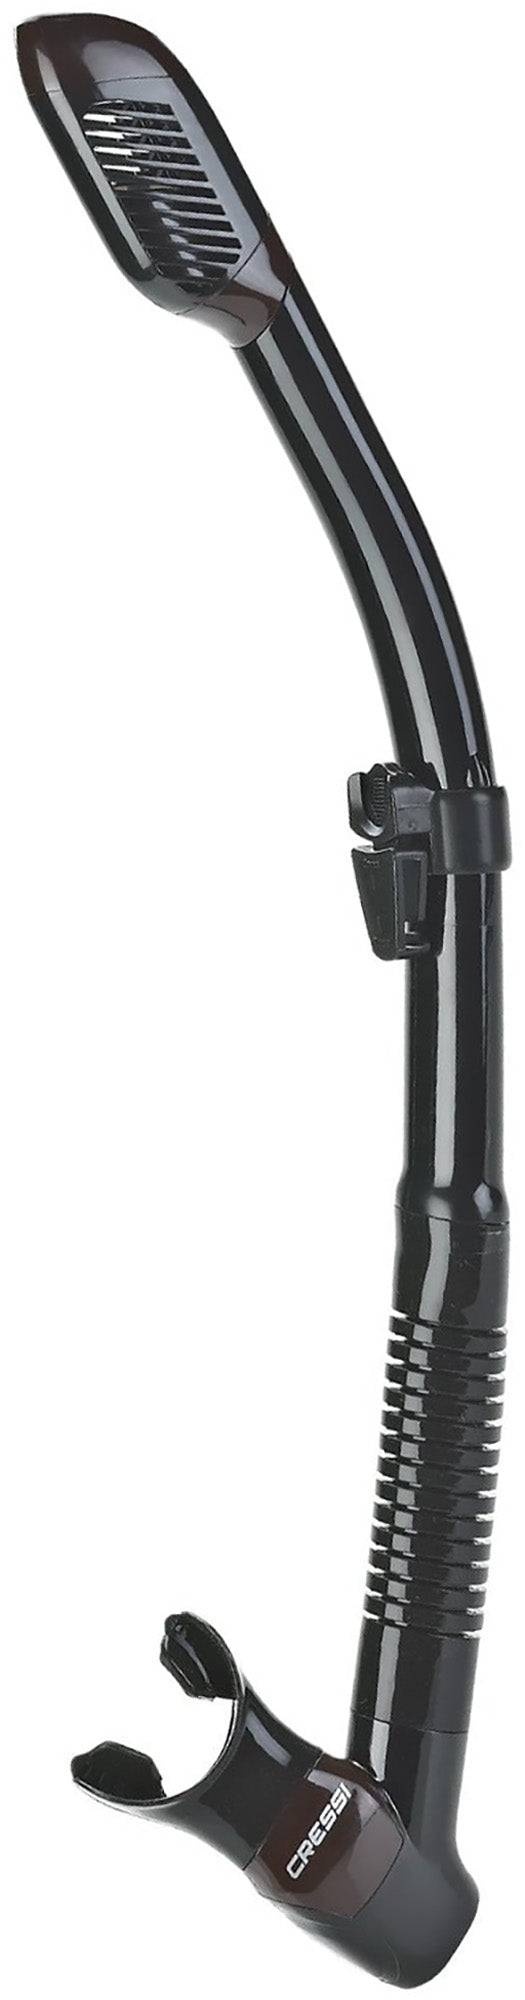 Cressi Dry Snorkel for Scuba Diving and Snorkeling Snorkel Tube with Dry Top Splash Guard, Designed in Italy